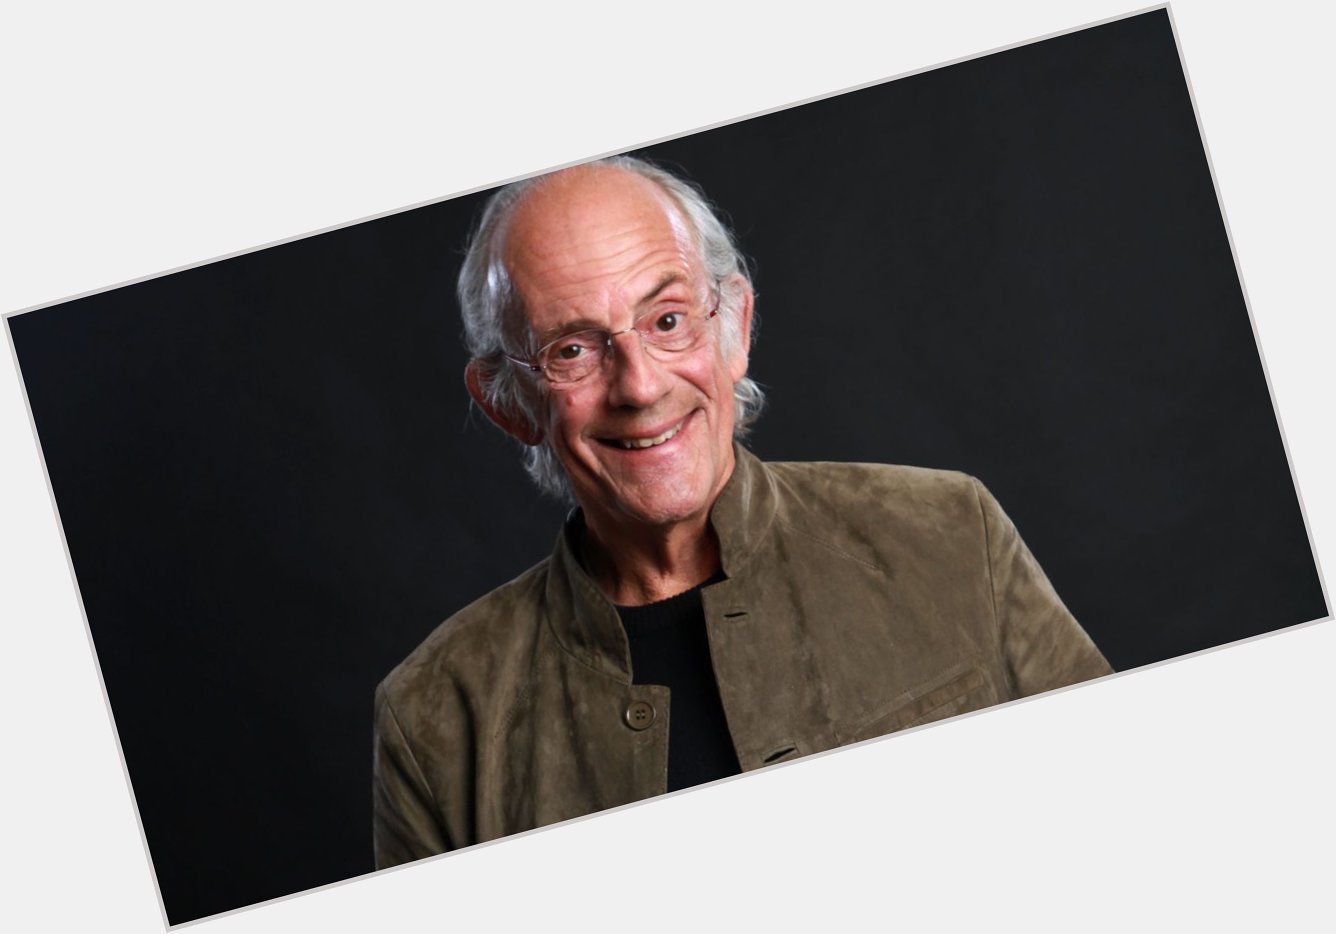 A belated Happy 80th Birthday to one of the most underrated actors, Christopher Lloyd. 